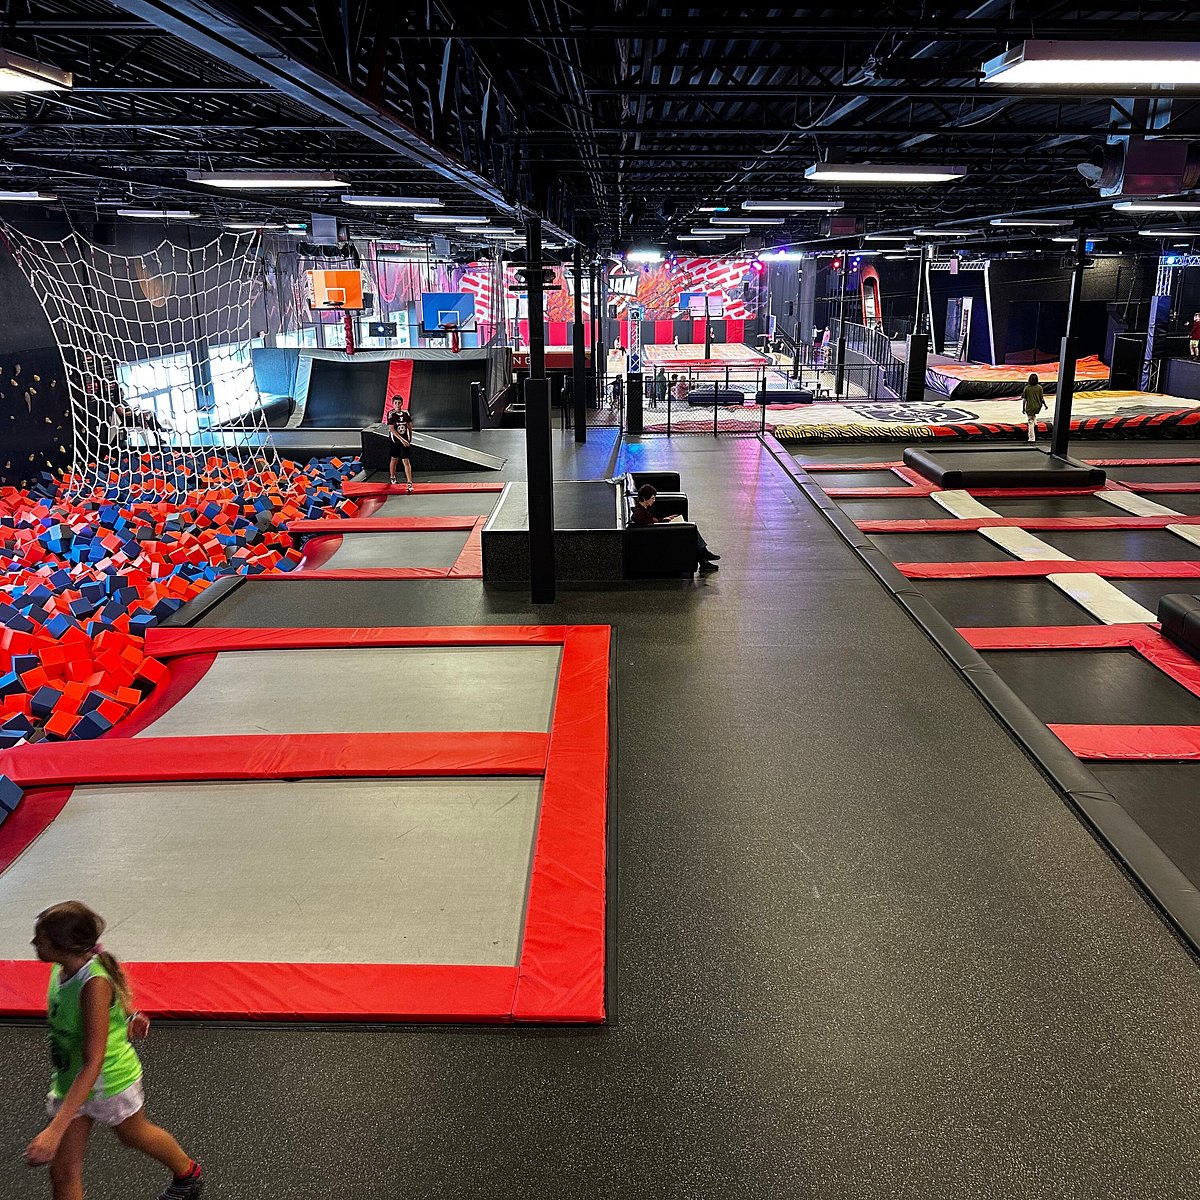 Defy Gravity Indoor Trampoline Park - All You Need to Know BEFORE